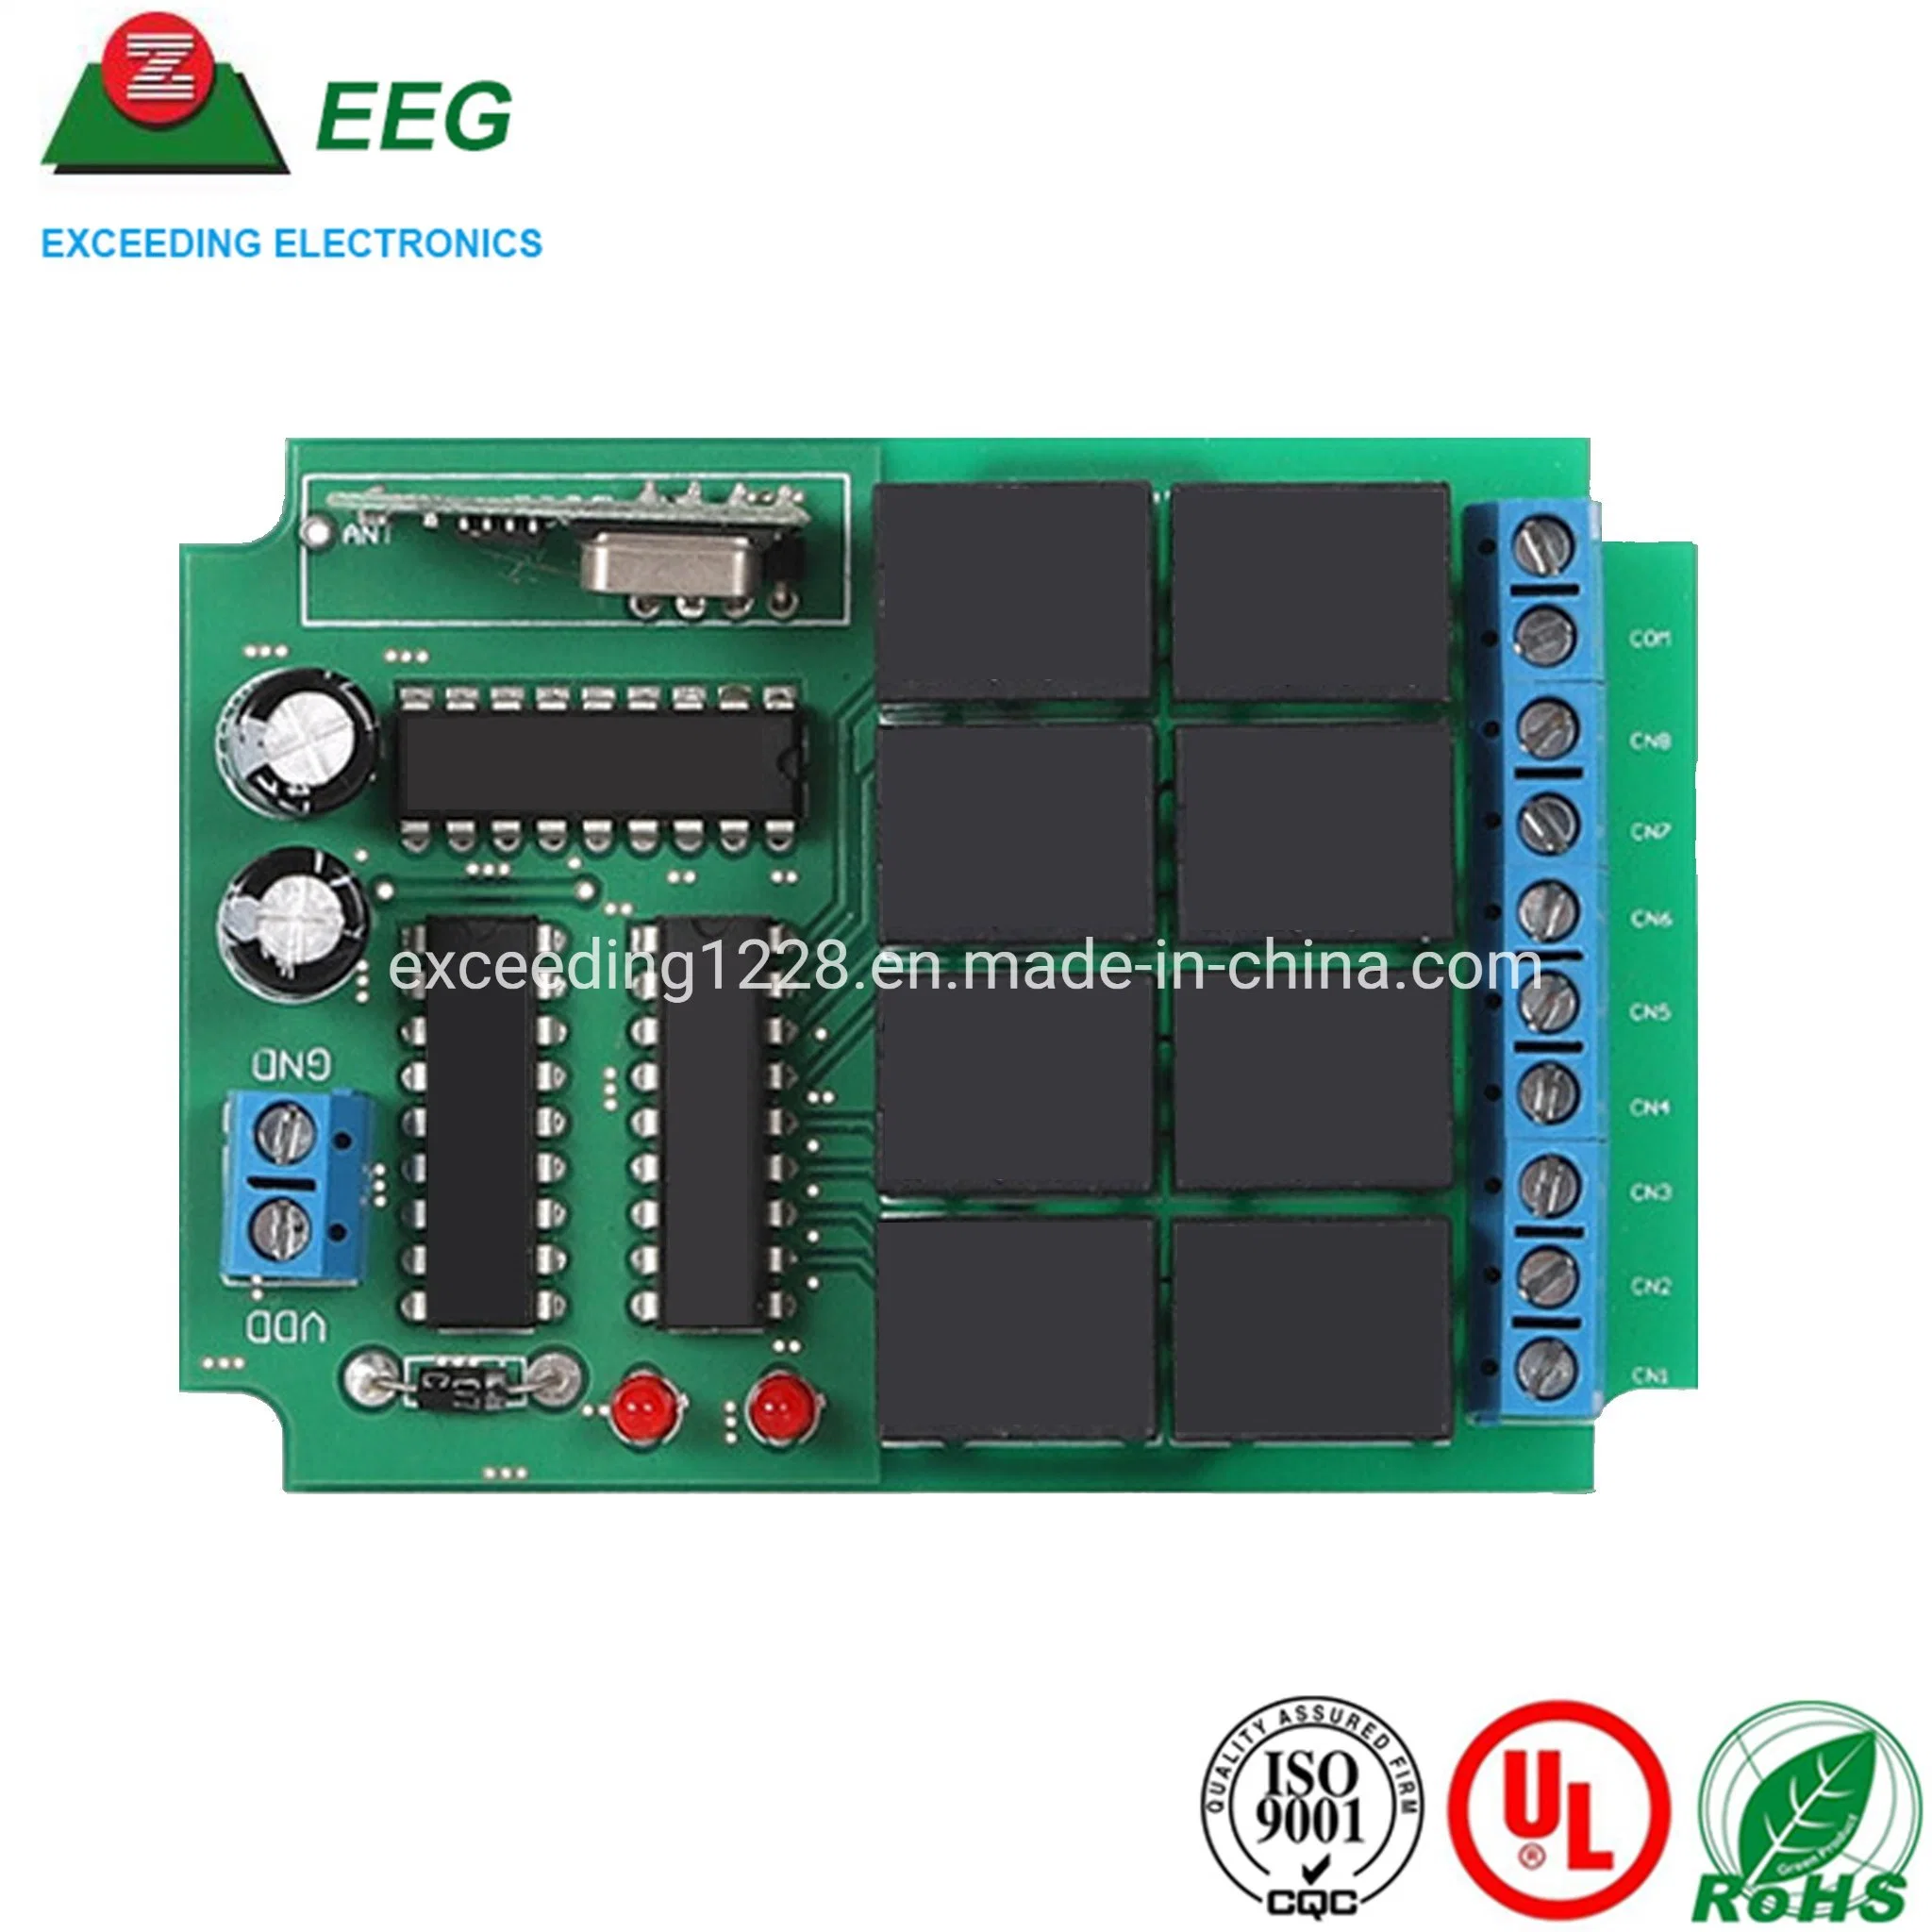 Circut Board for Medical/Industrial/Consumer Electronics PCBA